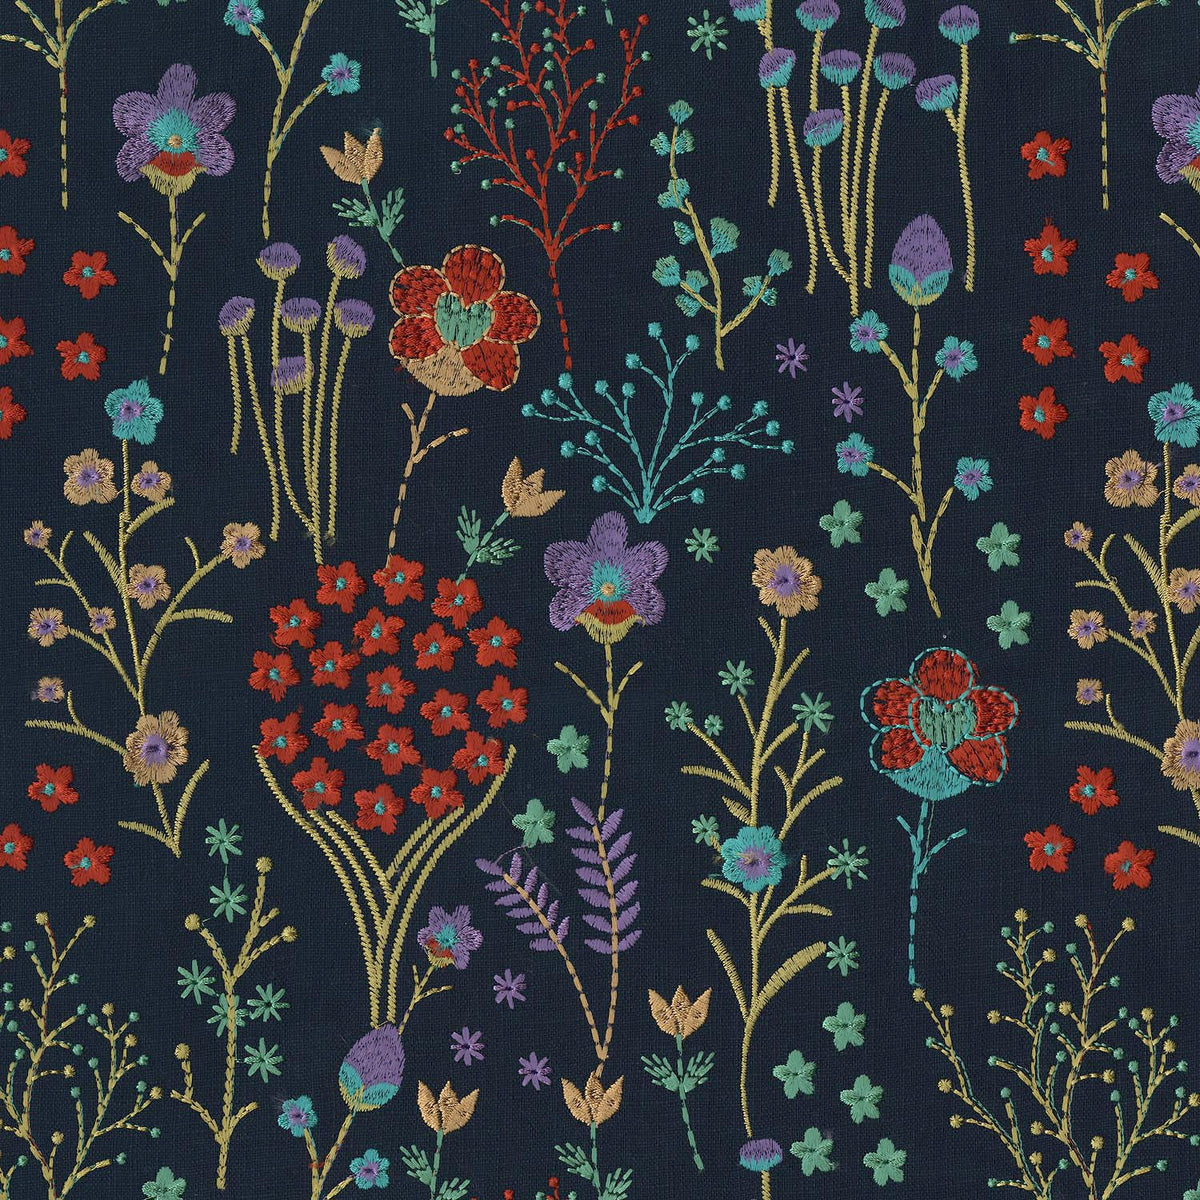 P/K Lifestyles Floral Feast Embroidery - Twilight 410522 Upholstery Fabric